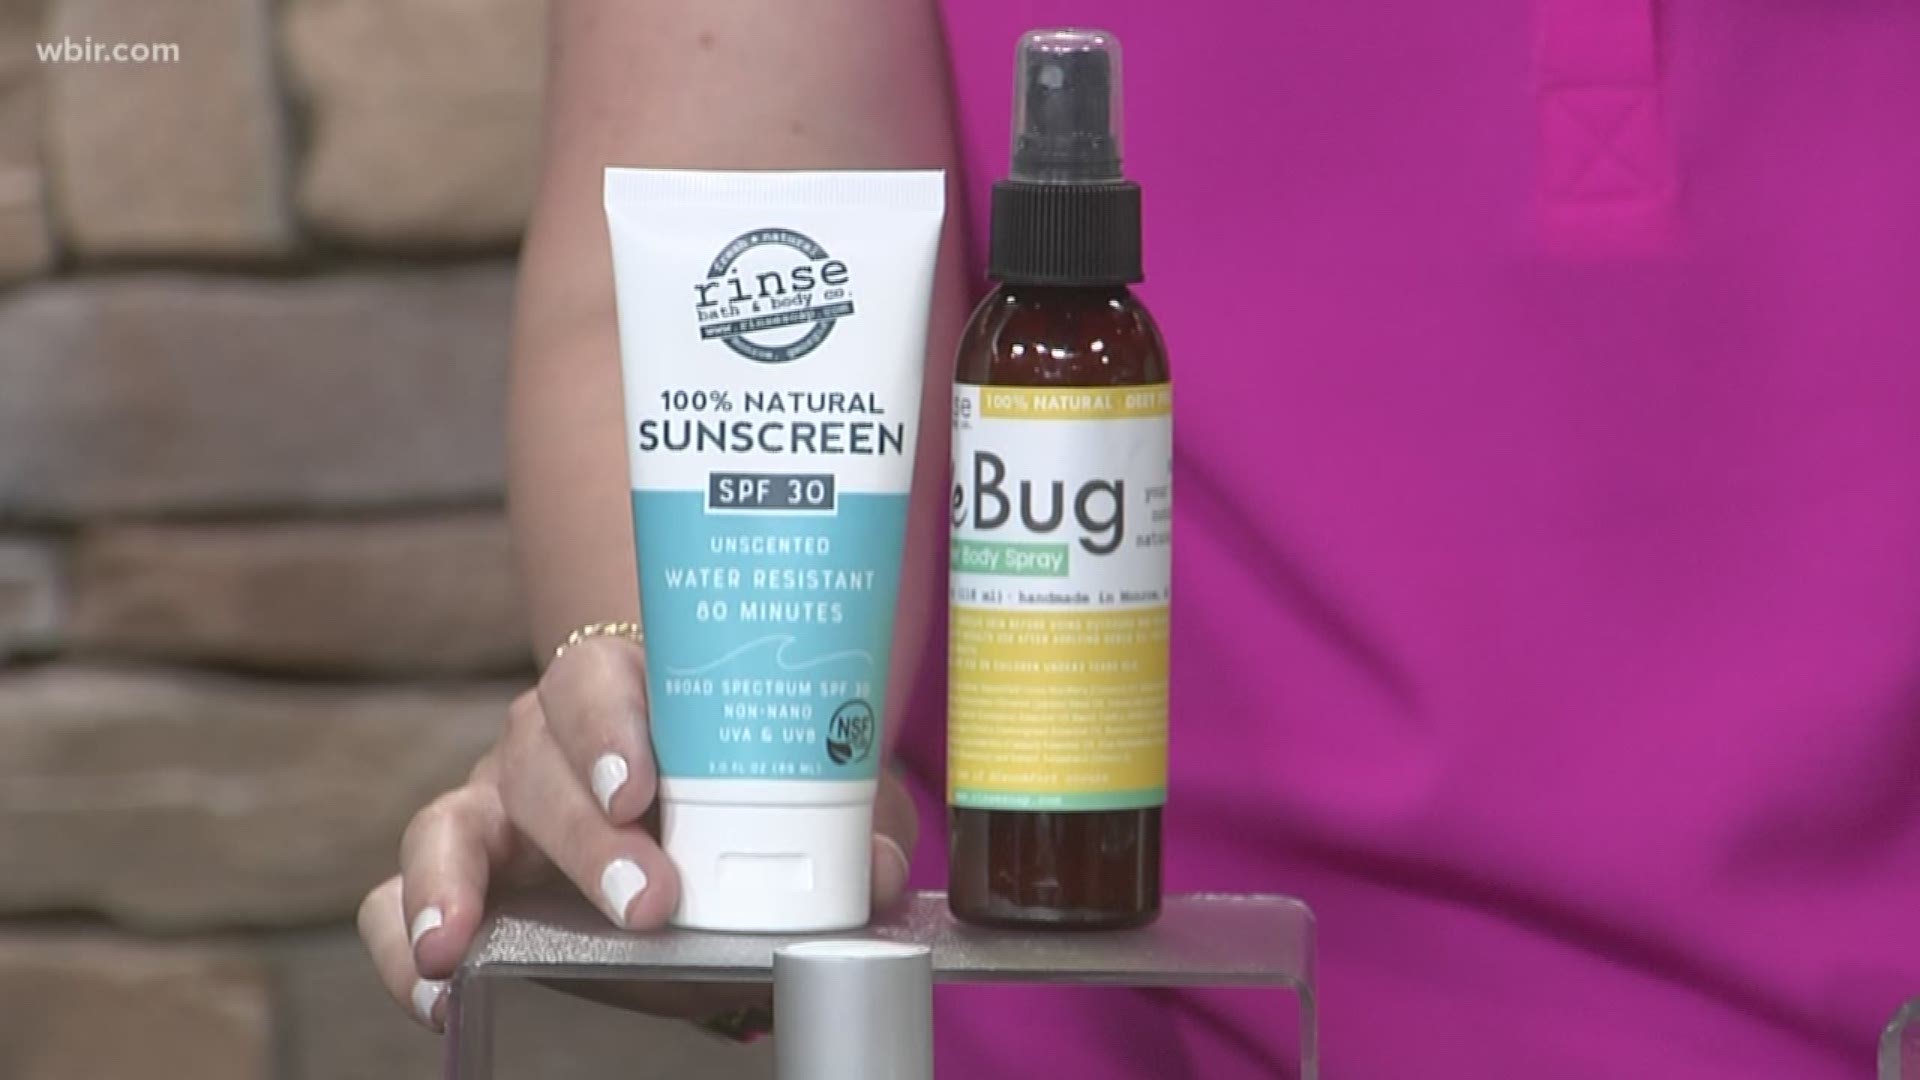 Beauty Blogger Elizabeth Ogle shows us some beauty products to protect and pamper your skin this summer.